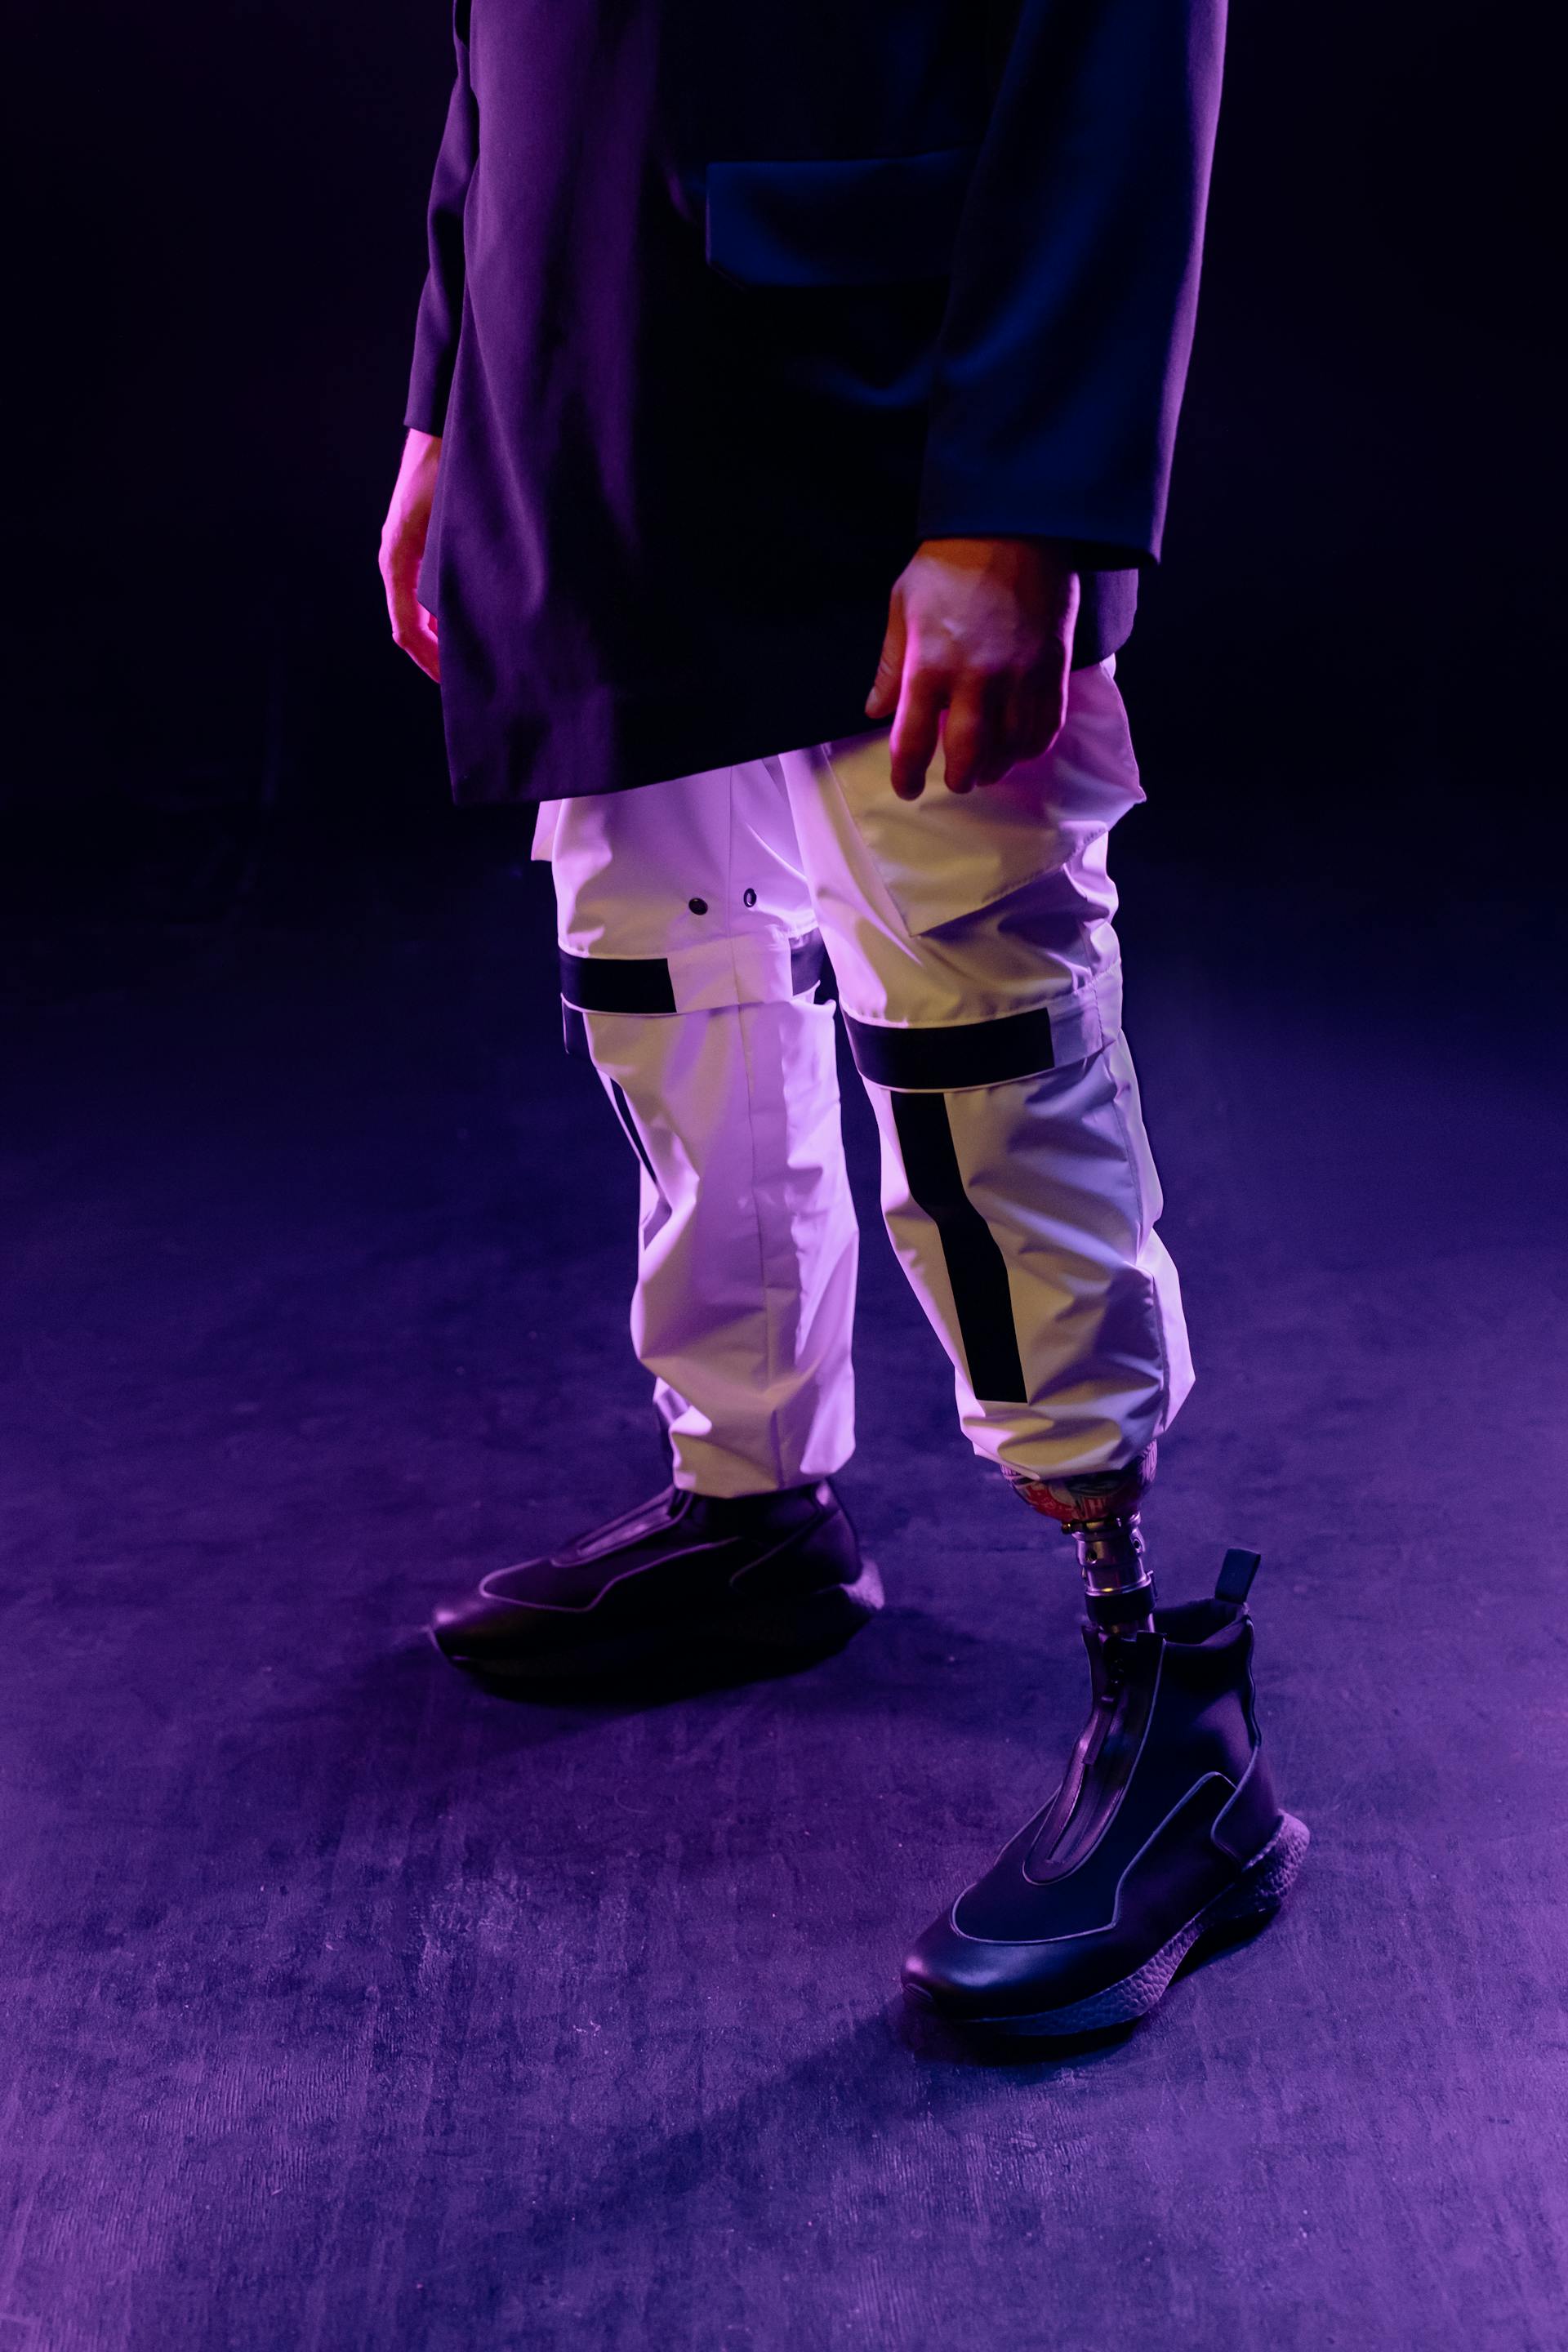 A man with a prosthetic leg in white pants and black shoes | Source: Pexels